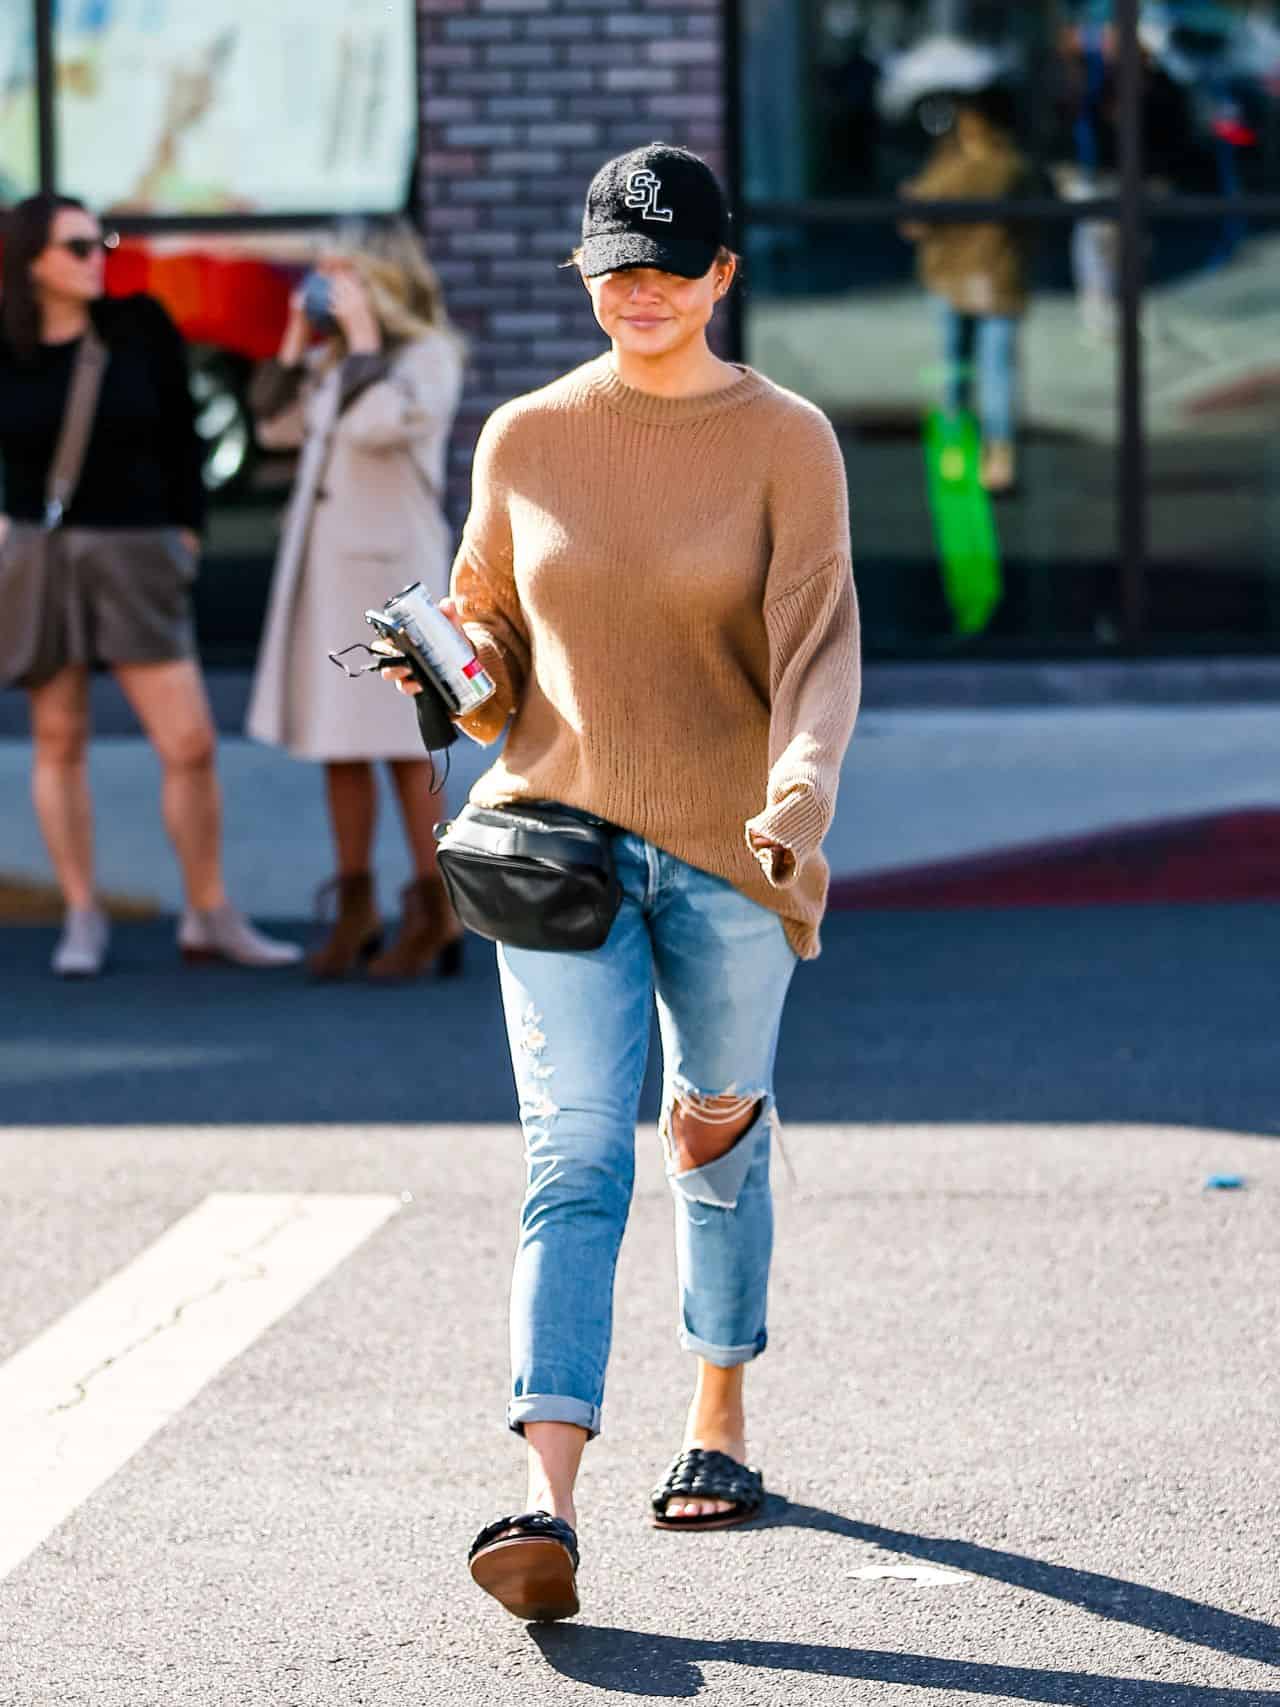 Chrissy Teigen Sported a Cozy Look for Shopping in a Luxury Store RealReal